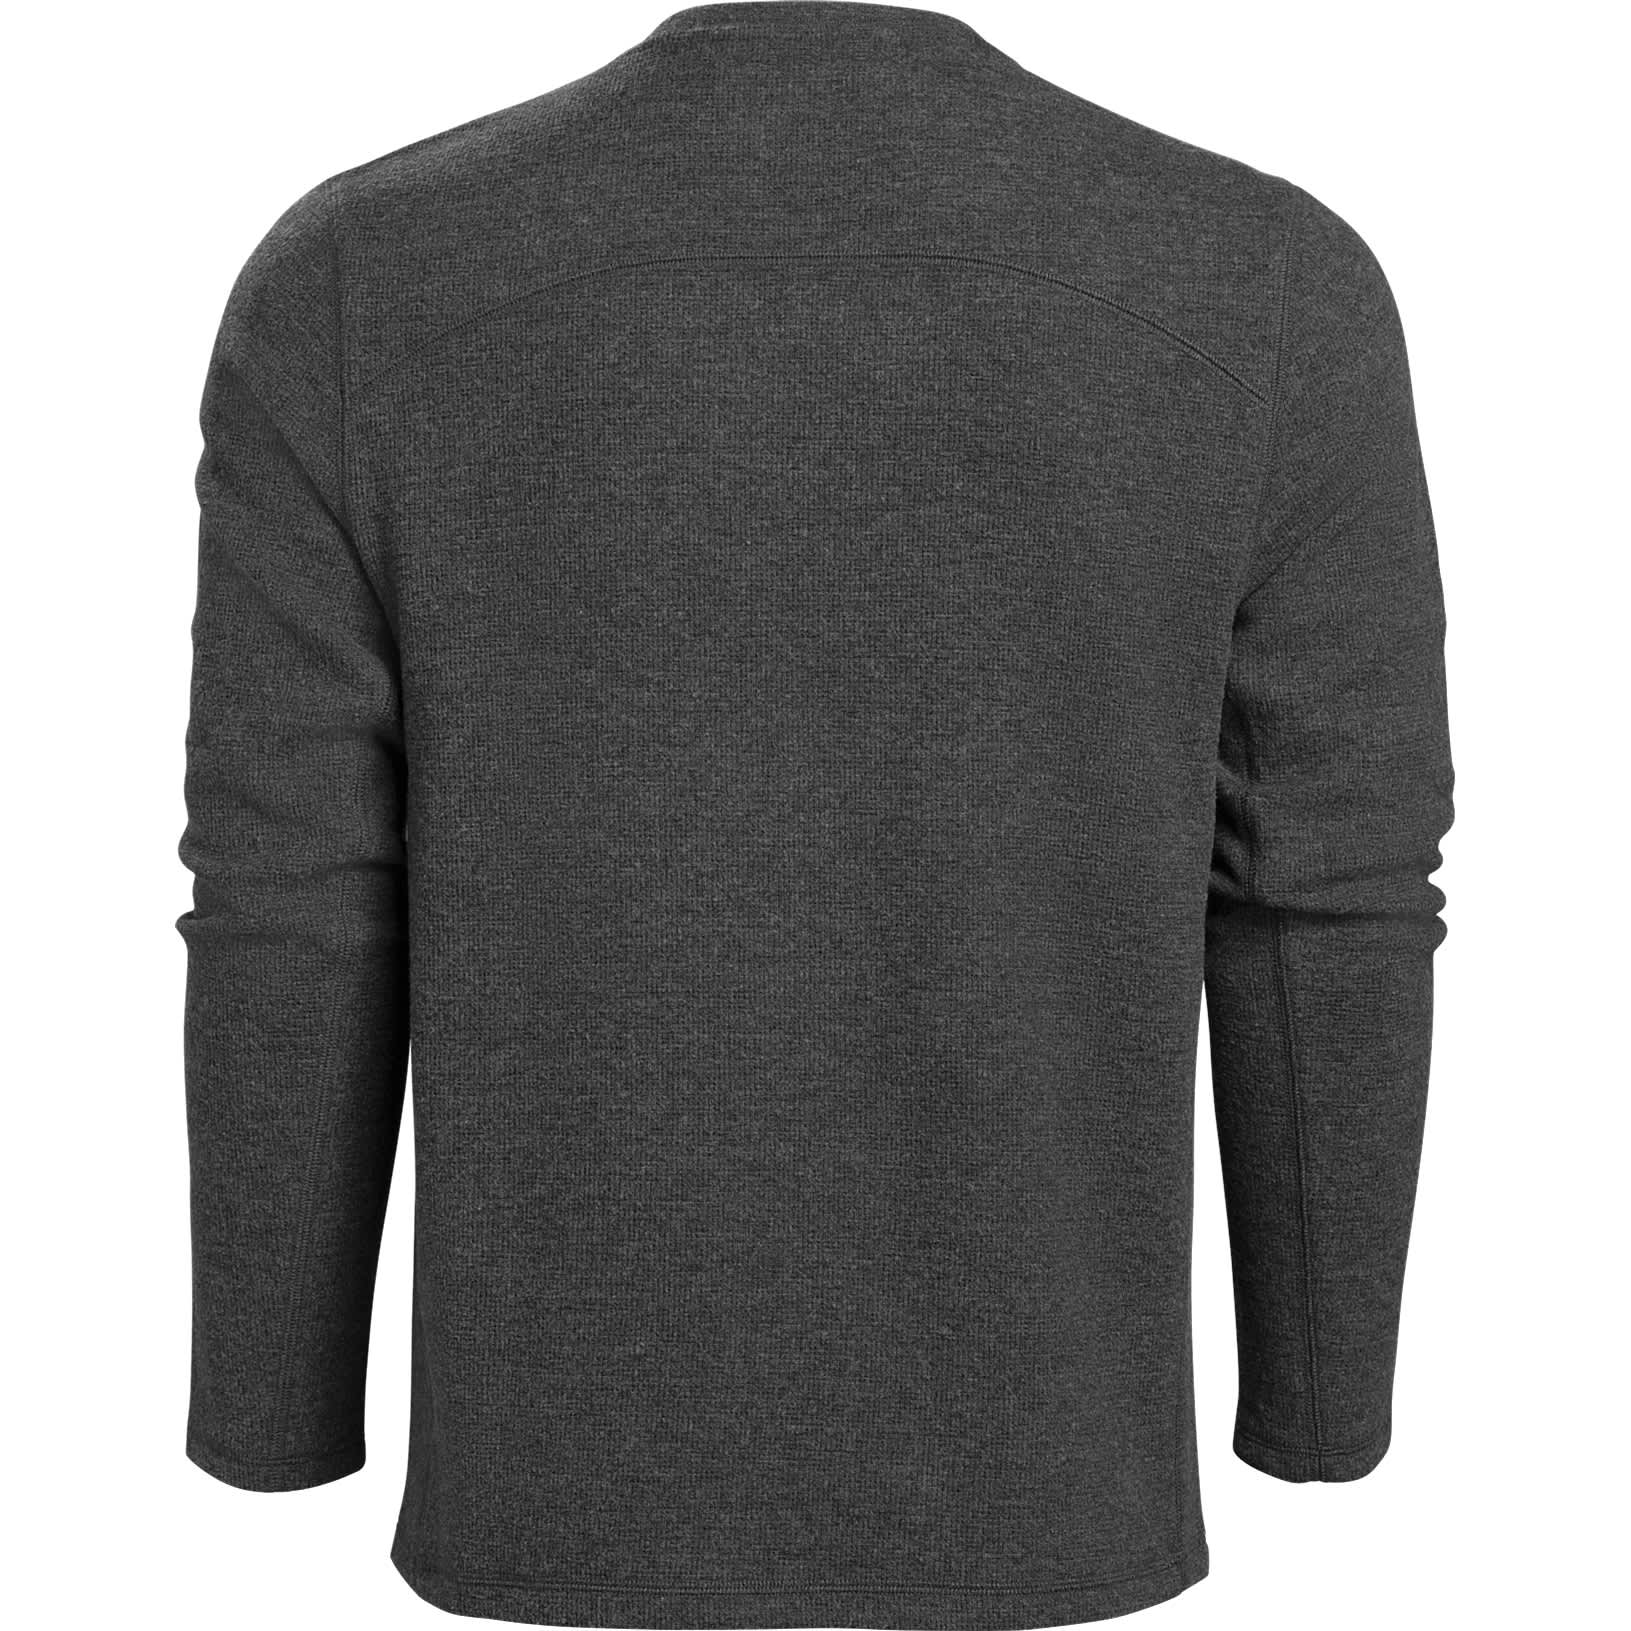 Vortex® Men’s Front Country Thermal Long-Sleeve Top